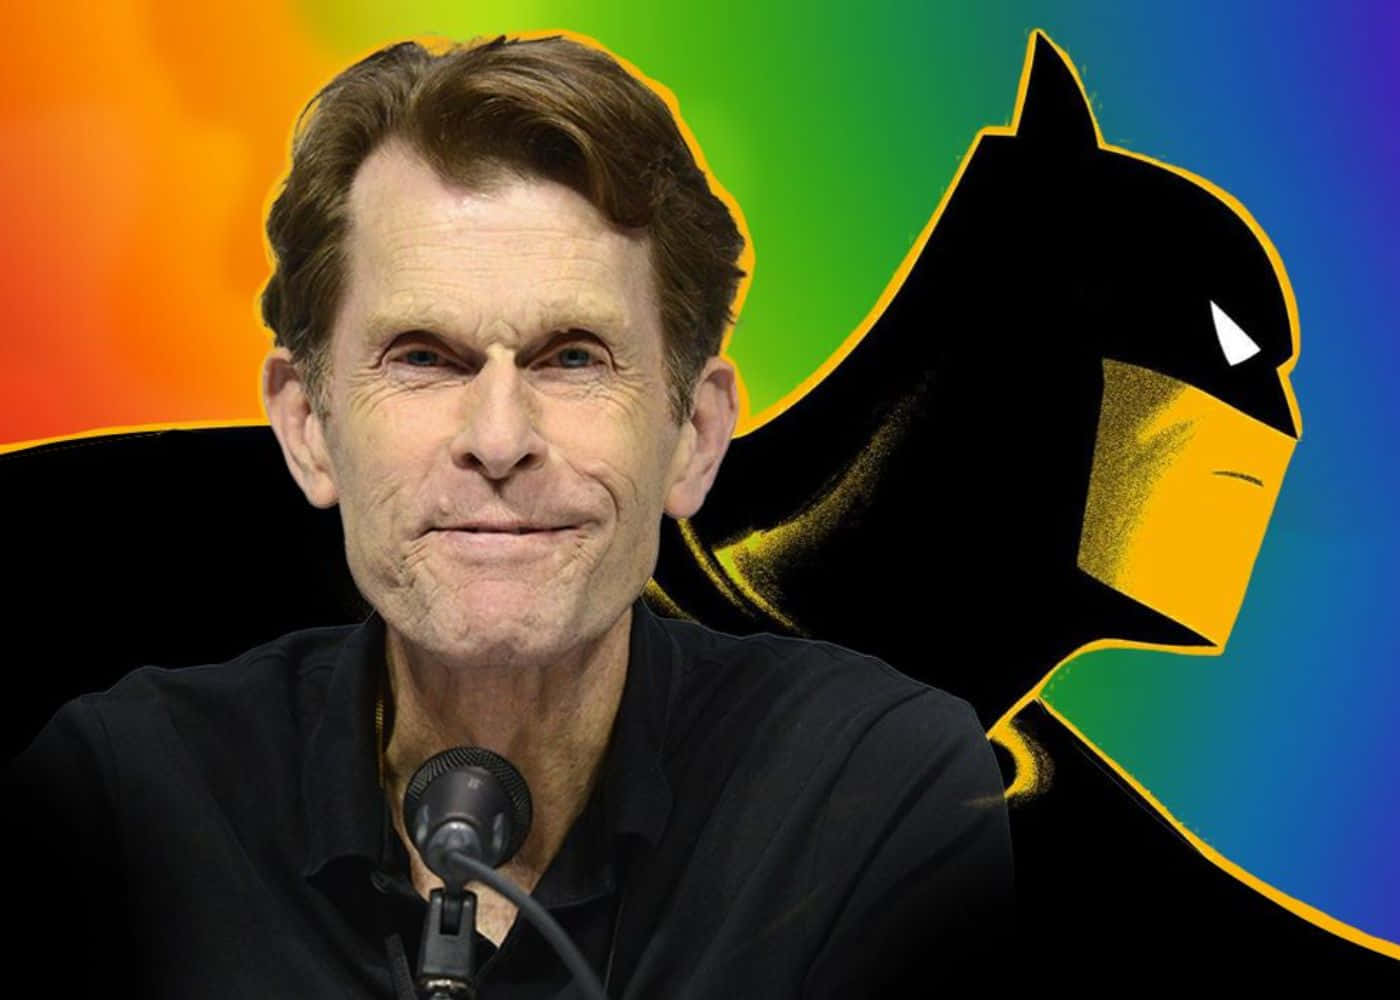 Kevin Conroy behind the scenes of a recording session Wallpaper